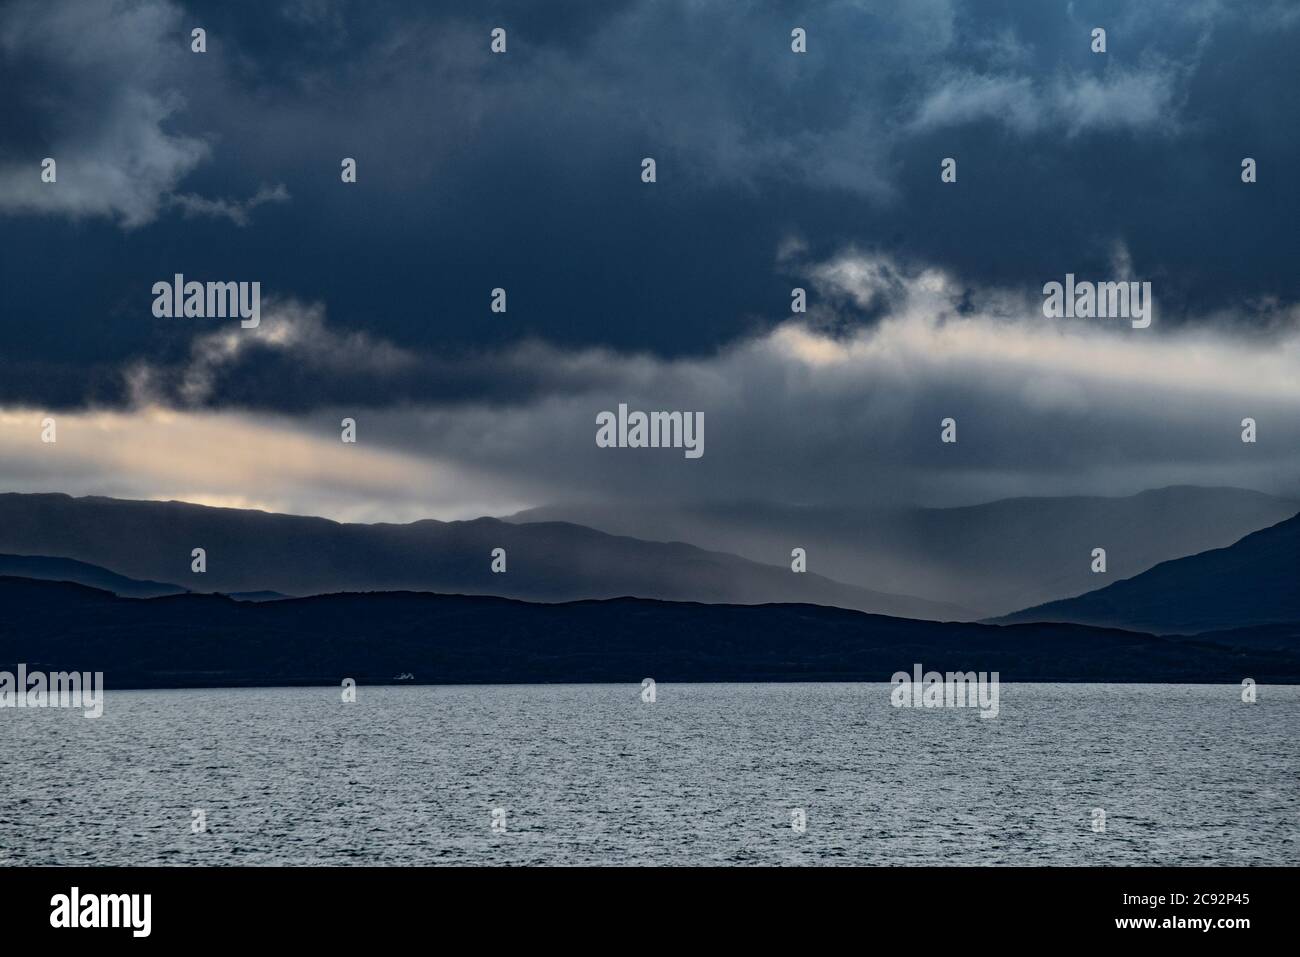 Storm clouds and showers on the Isle of Mull, Scottish Inner Hebrides near Oban, Argyll and Bute. Stock Photo